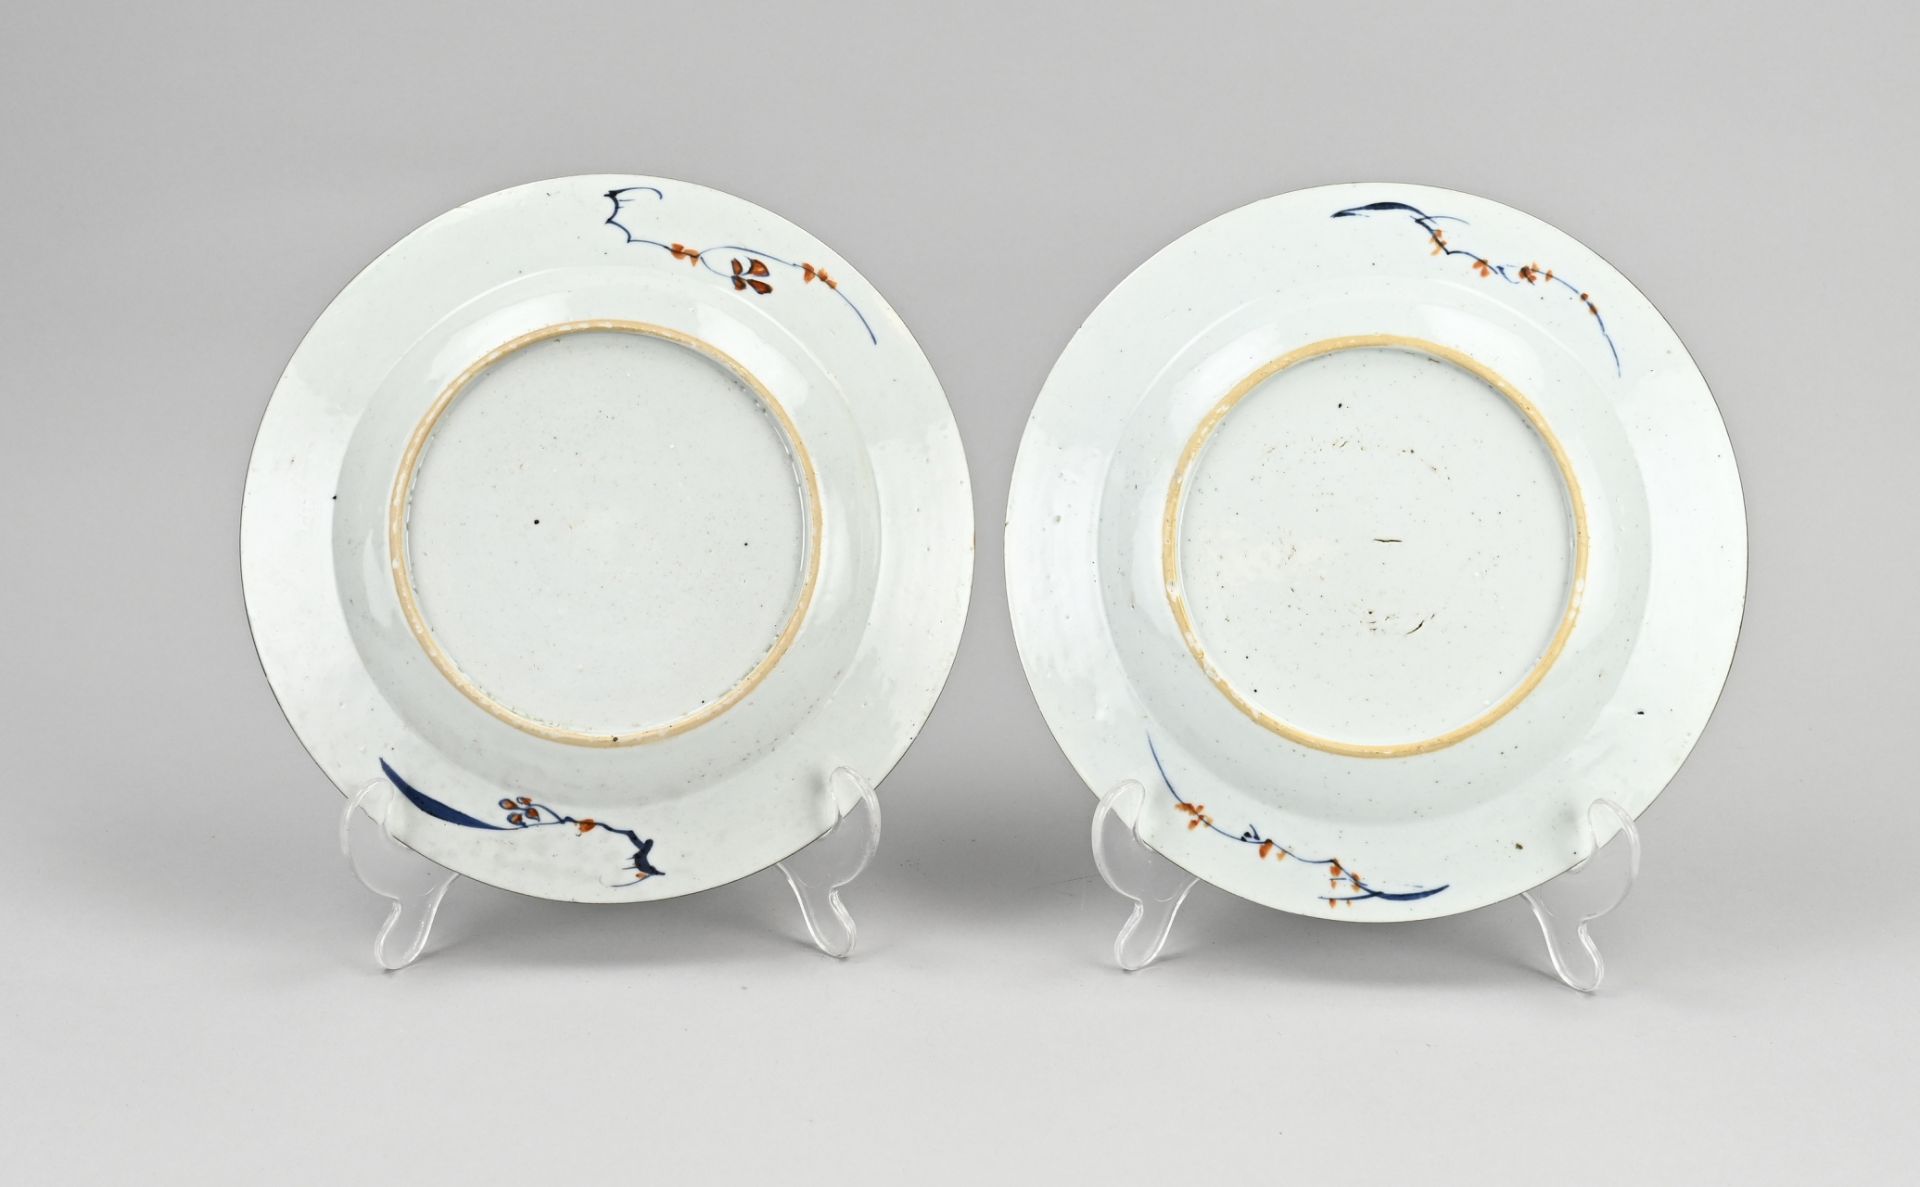 Two antique Chinese plates Ã˜ 21.7 cm. - Image 2 of 2